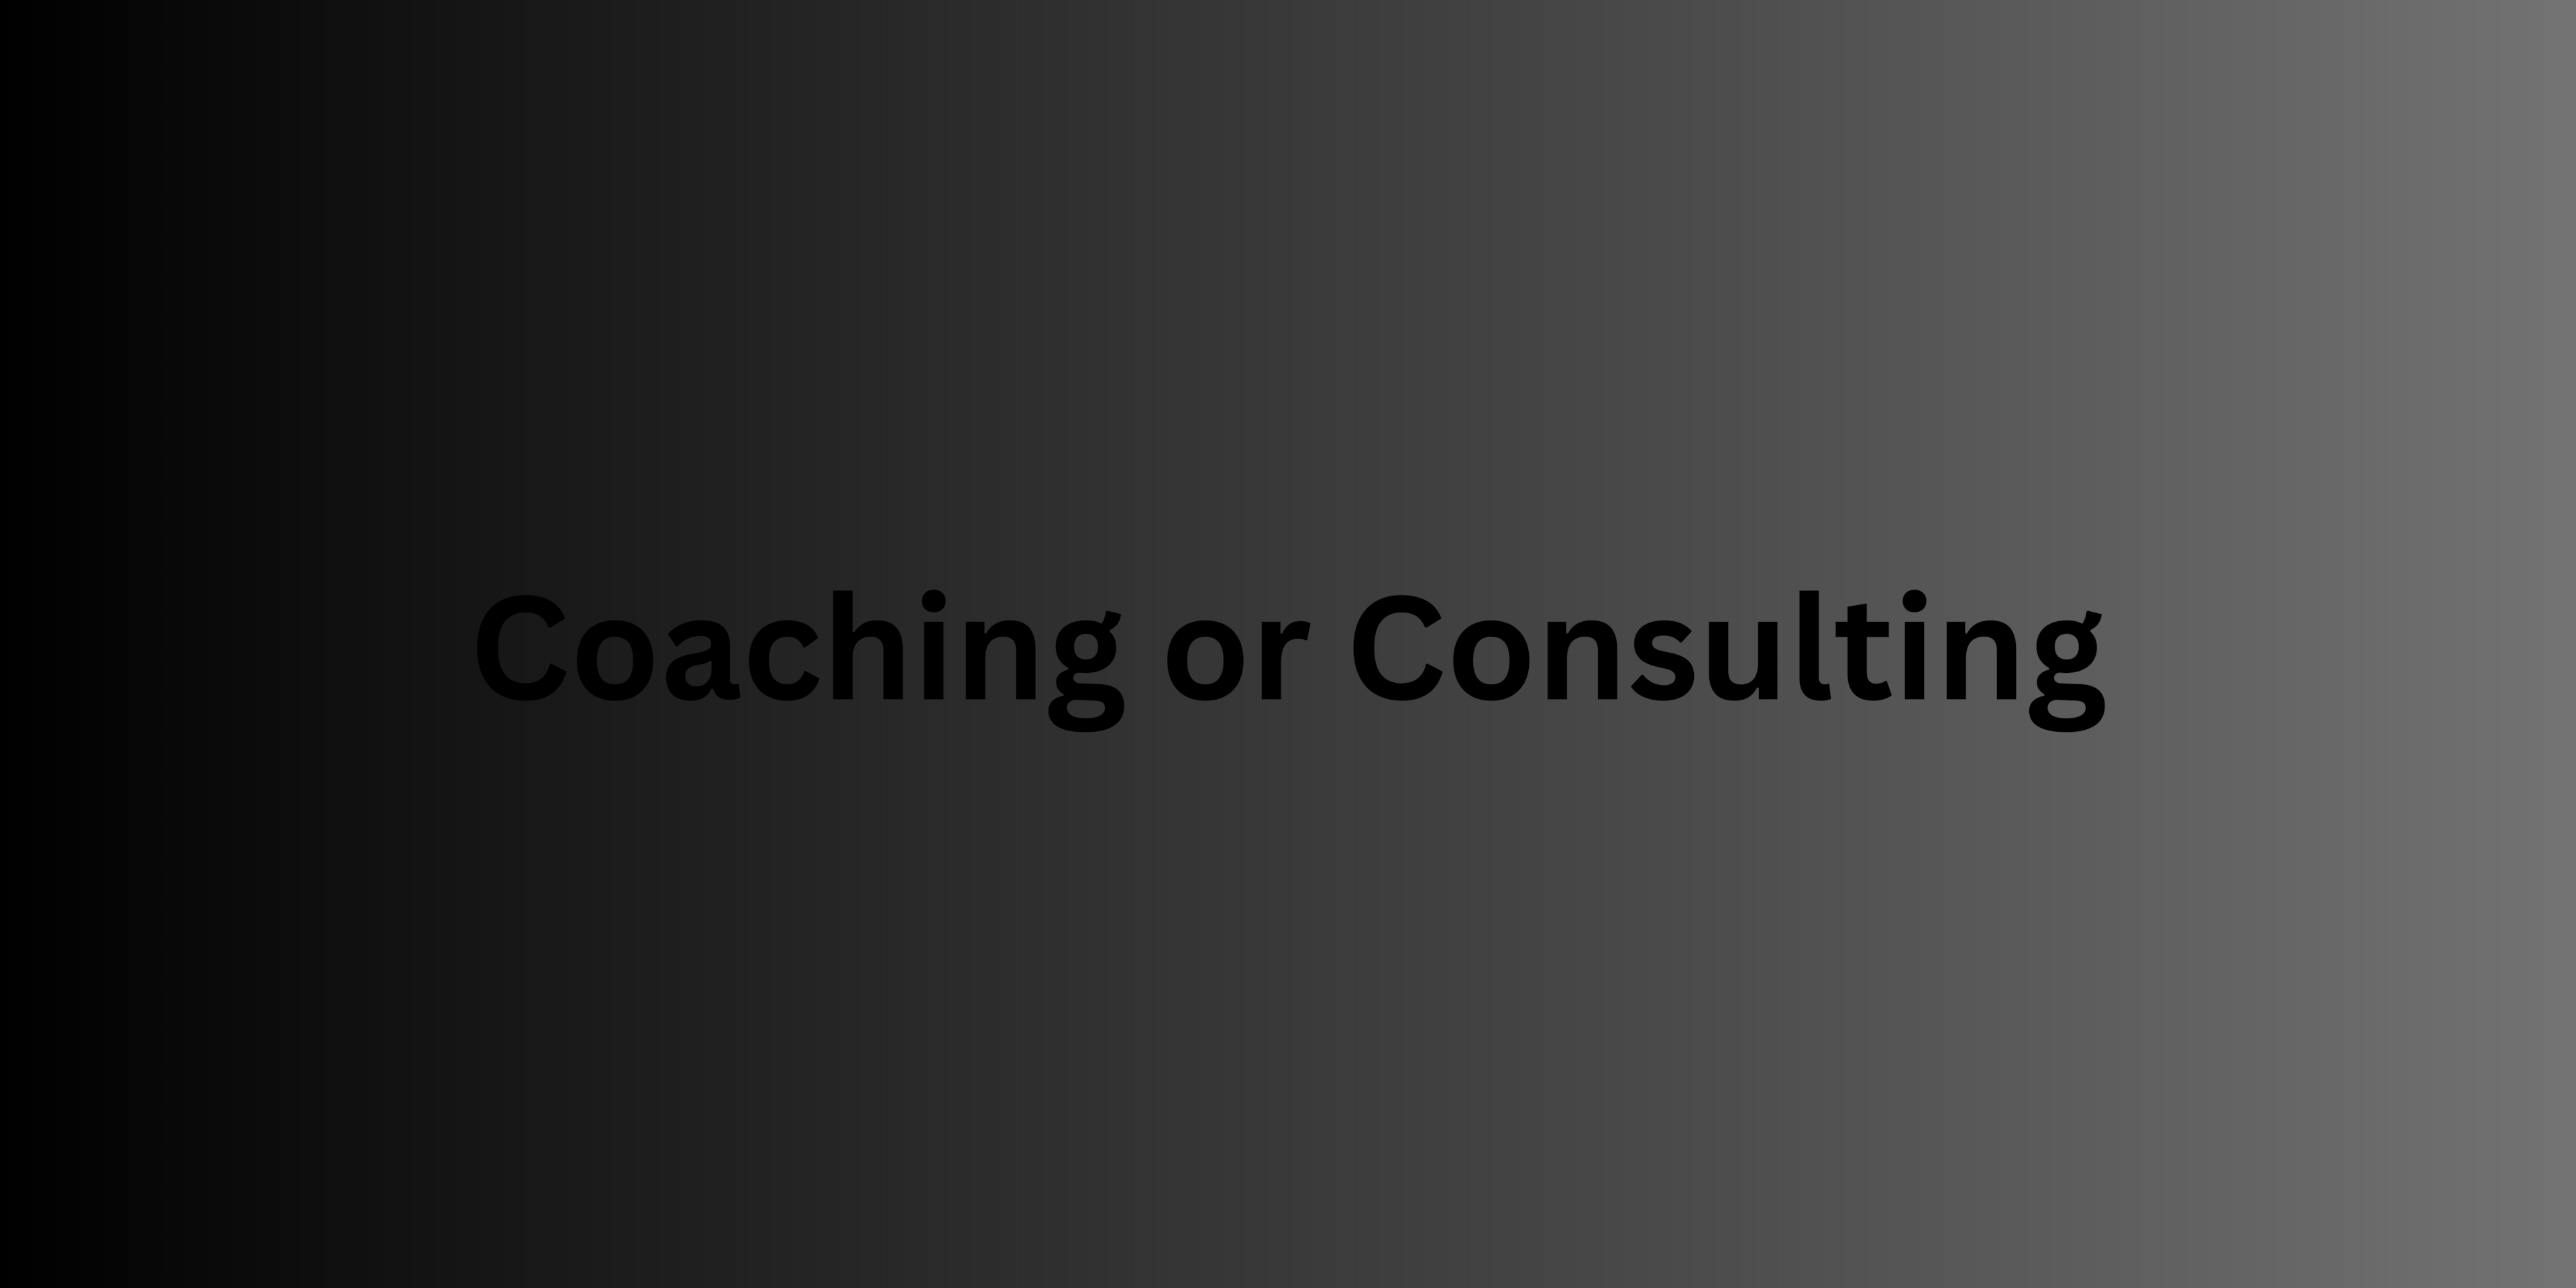 Coaching or Consulting